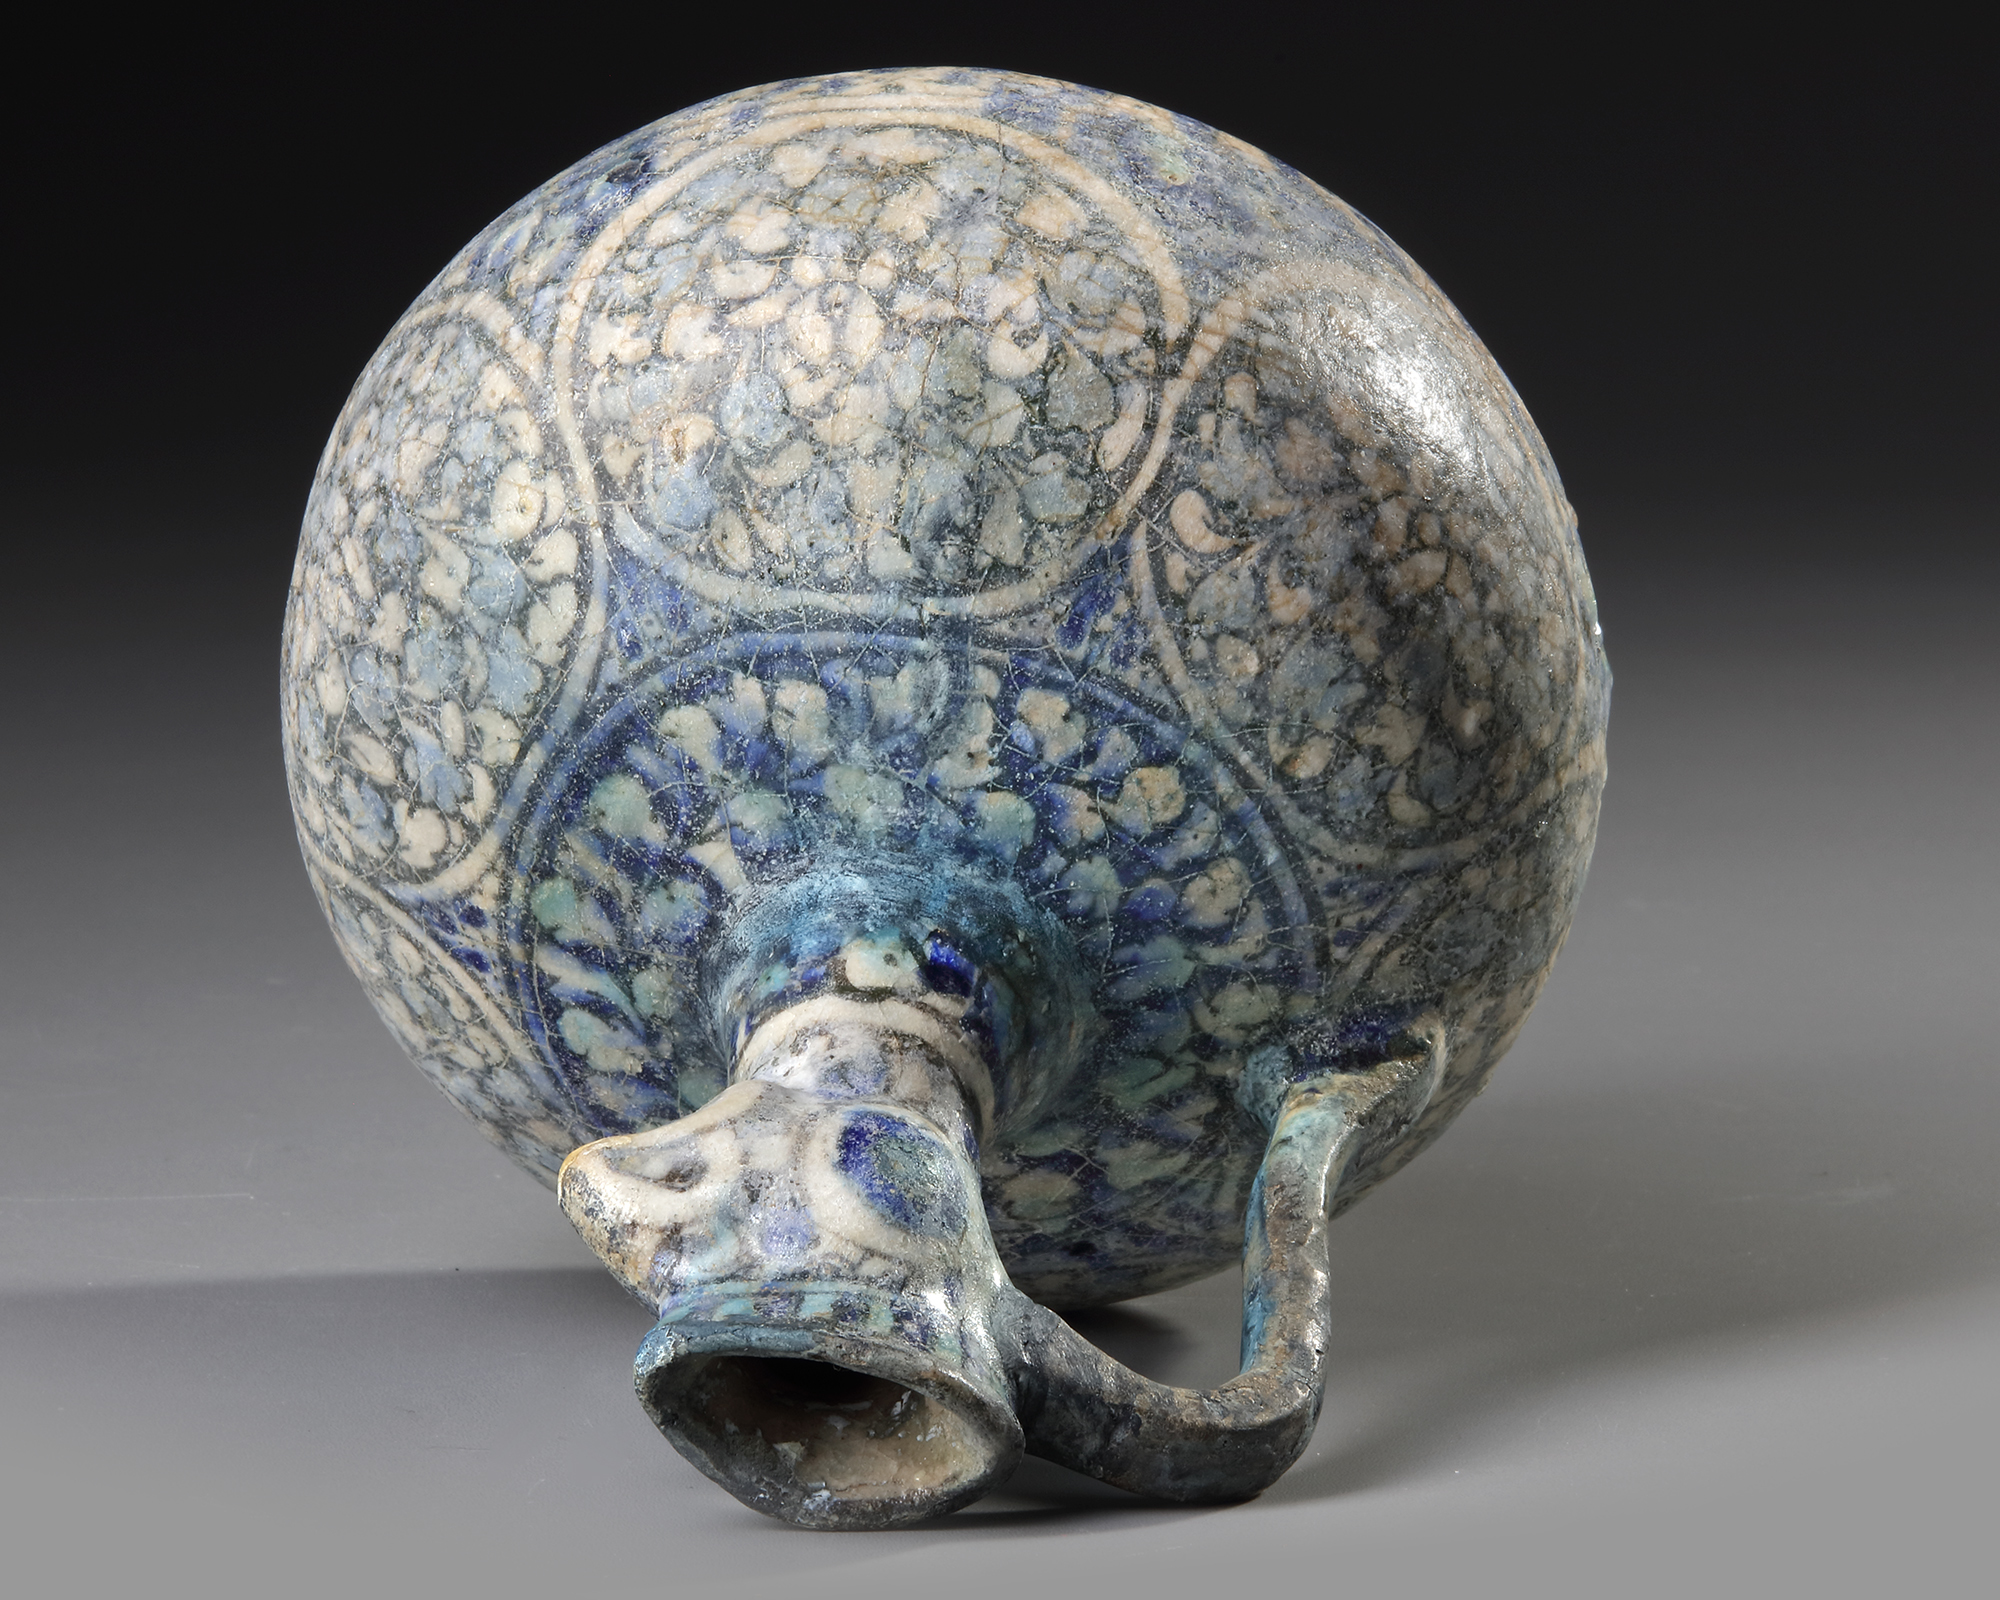 A SULTANABAD POTTERY COCKEREL-HEAD POTTERY EWER, PERSIA, 12TH CENTURY - Image 8 of 8